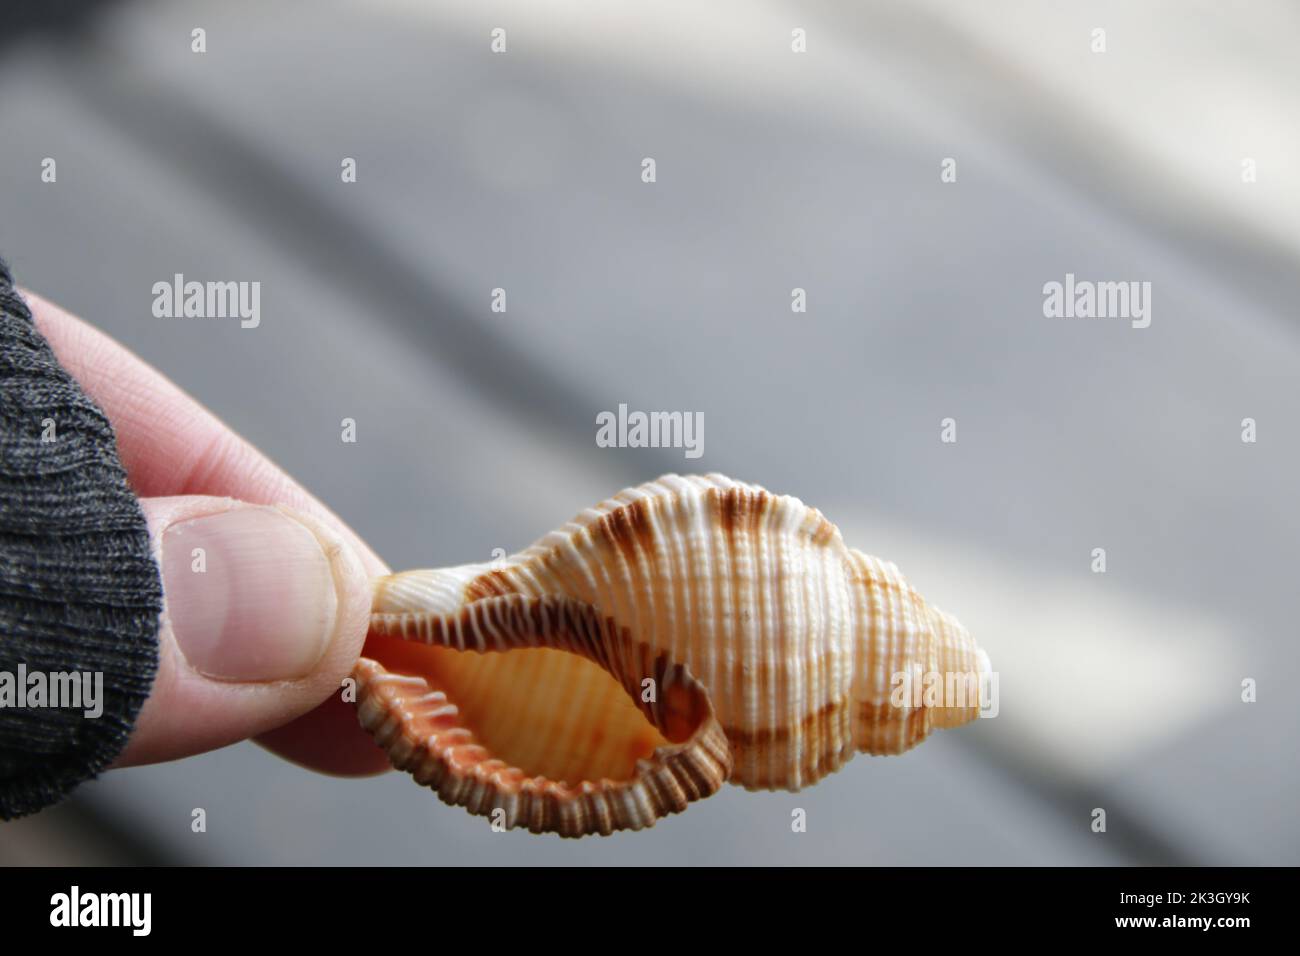 The hand holds a seashell. Marine background. Stock Photo